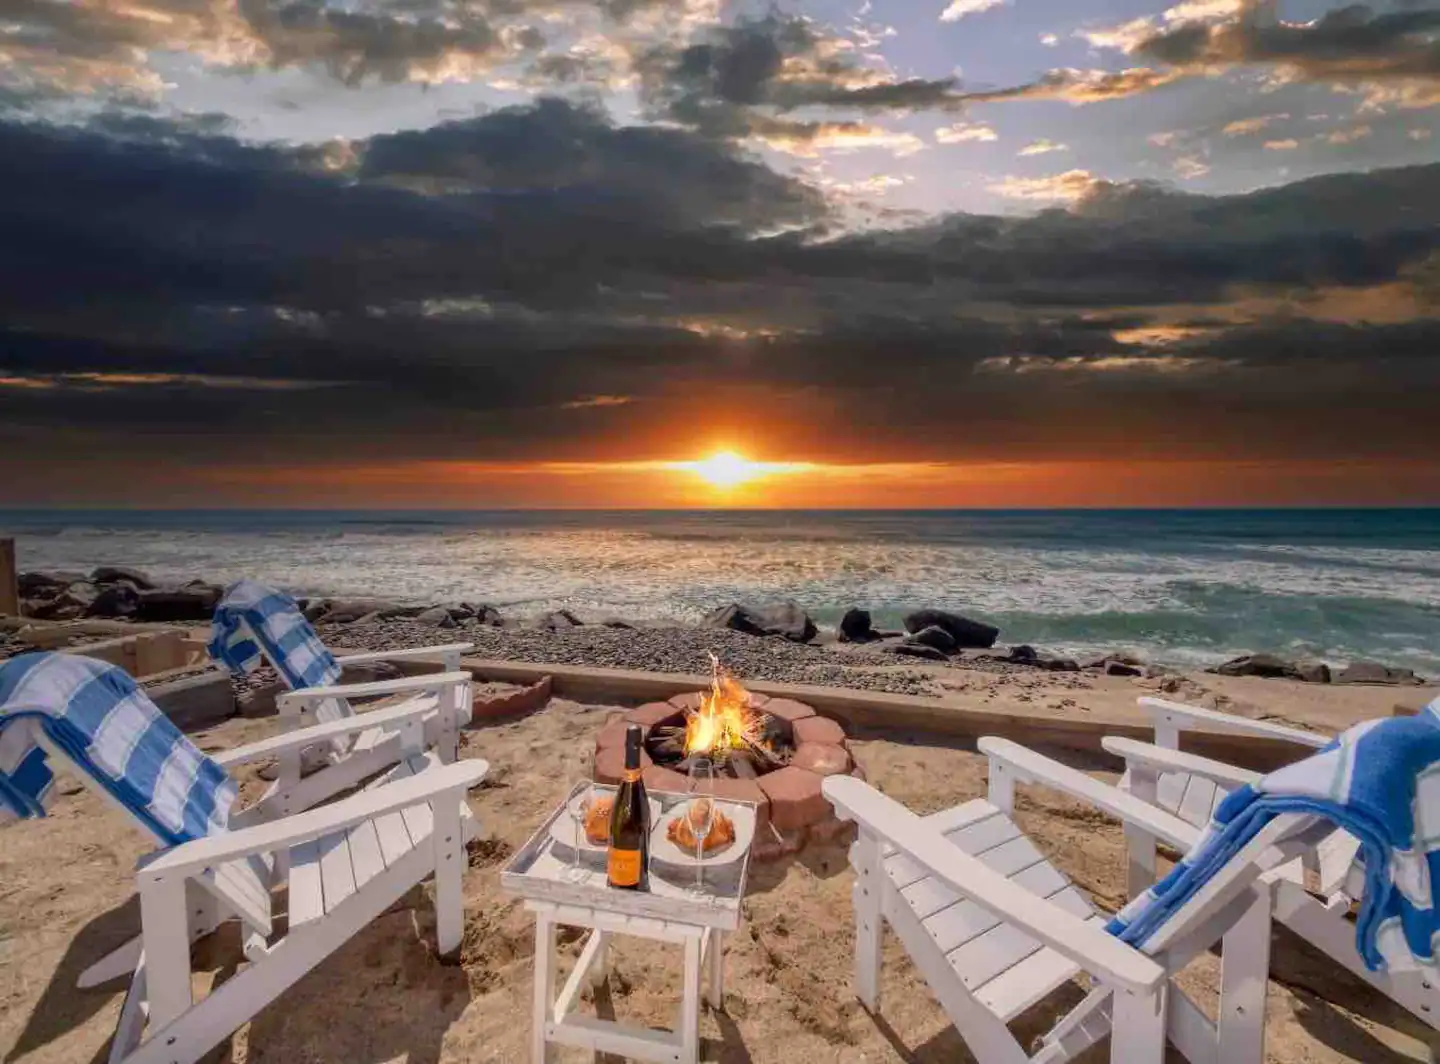 Consider yourself watching the sunset over a firepit with family and friends.